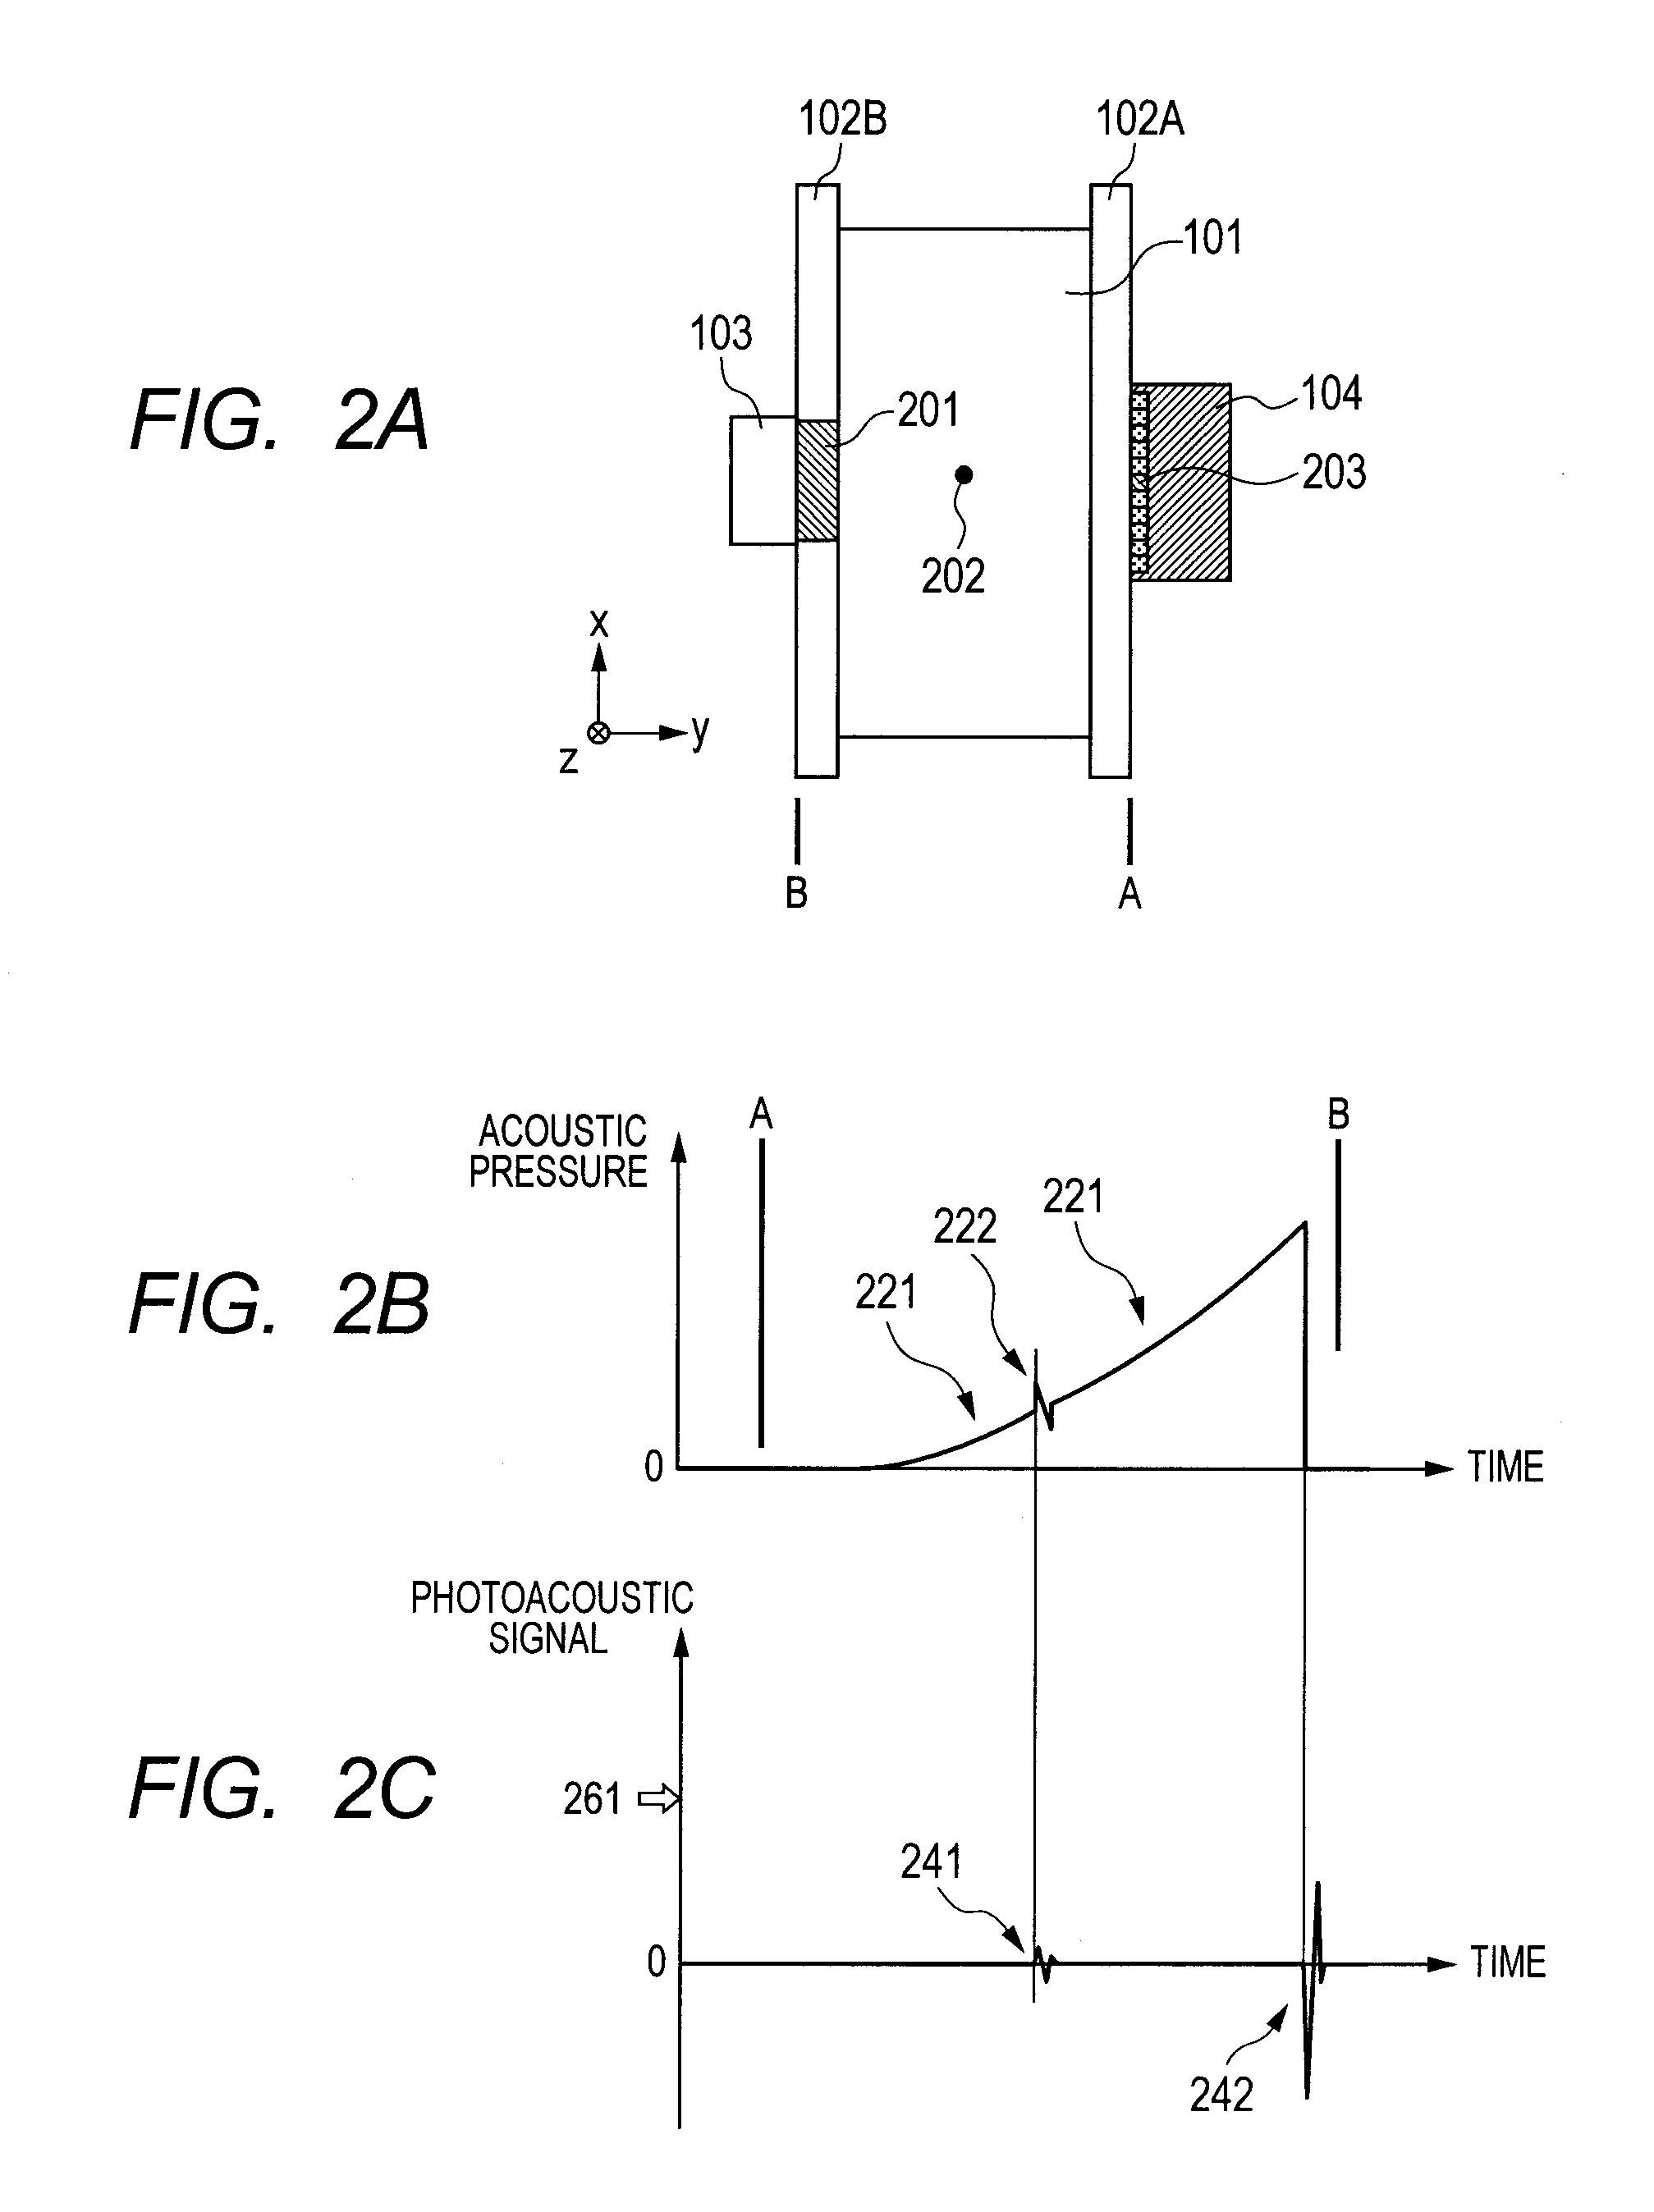 Photoacoustic measuring device and method